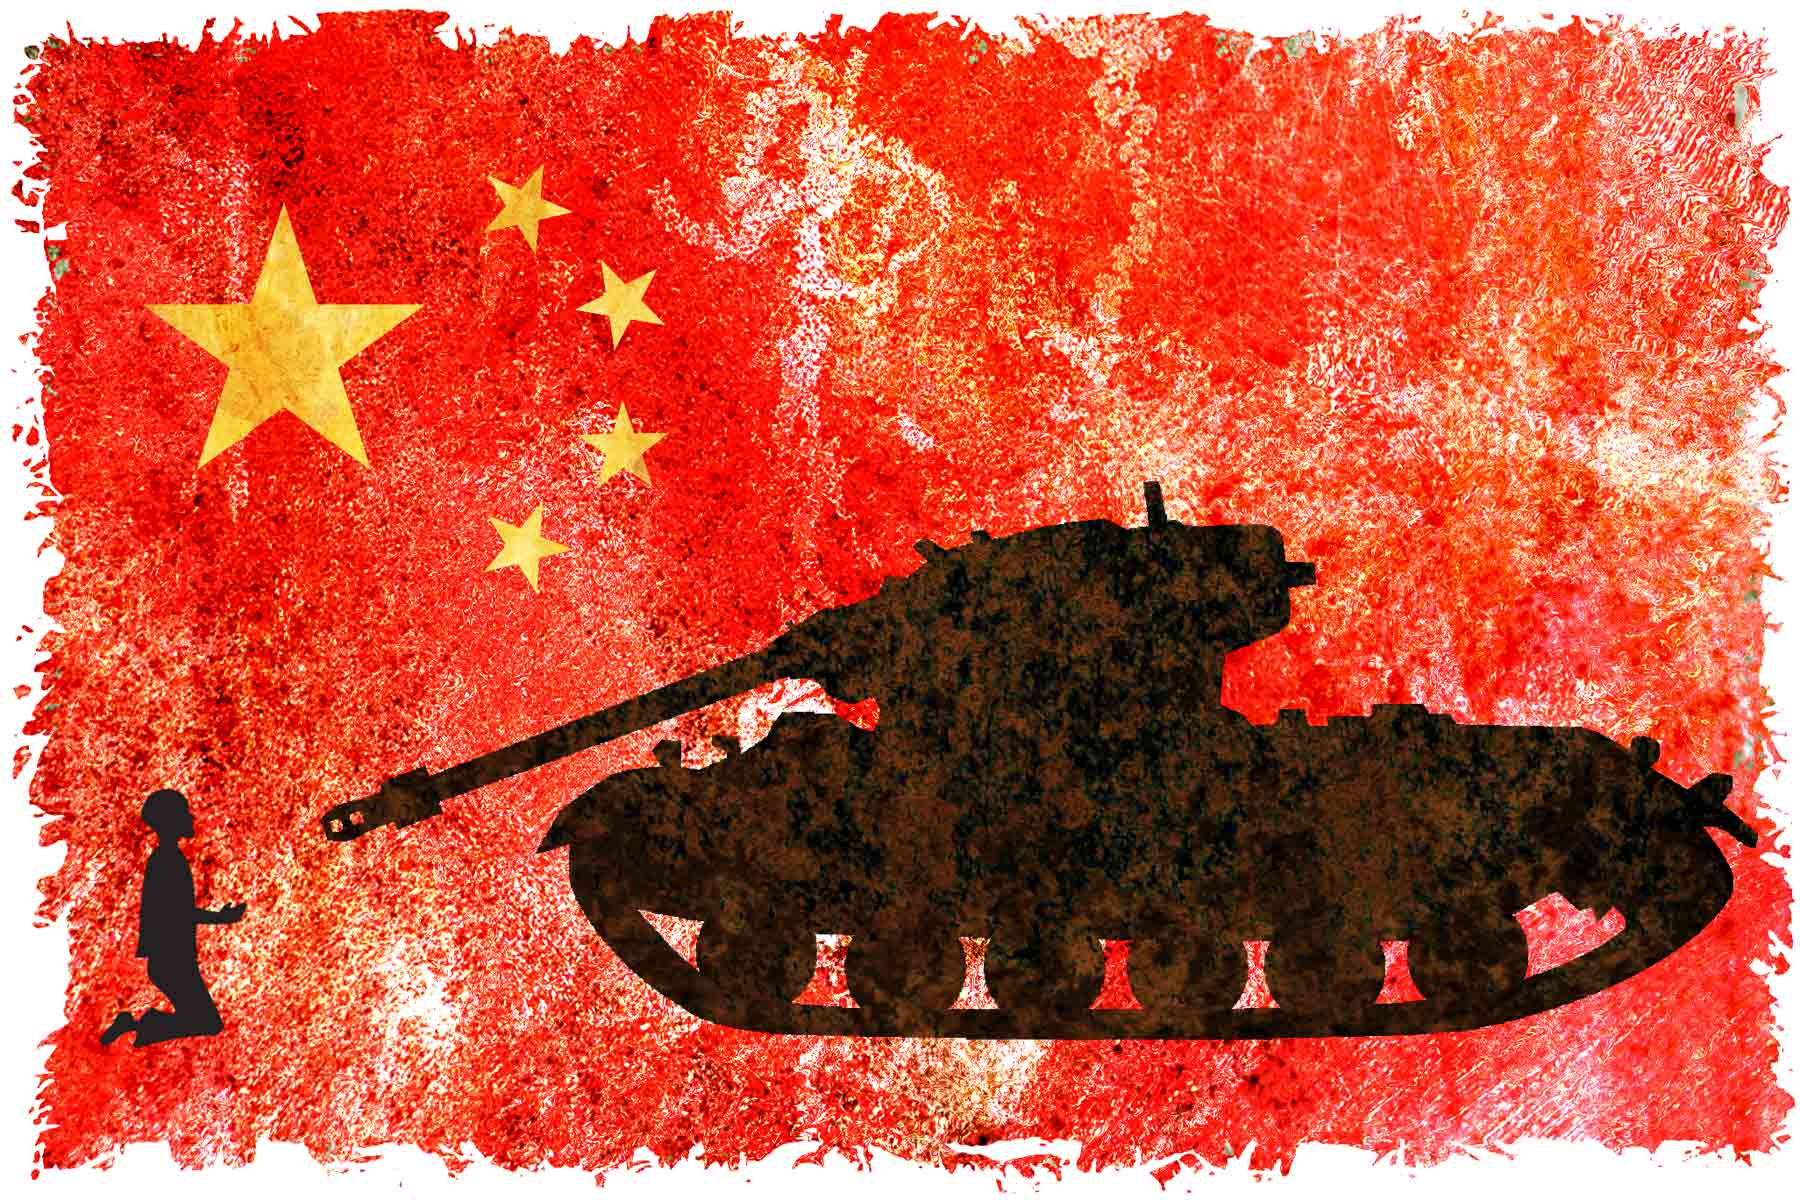 HASMATH: Red China’s iron grip on power 